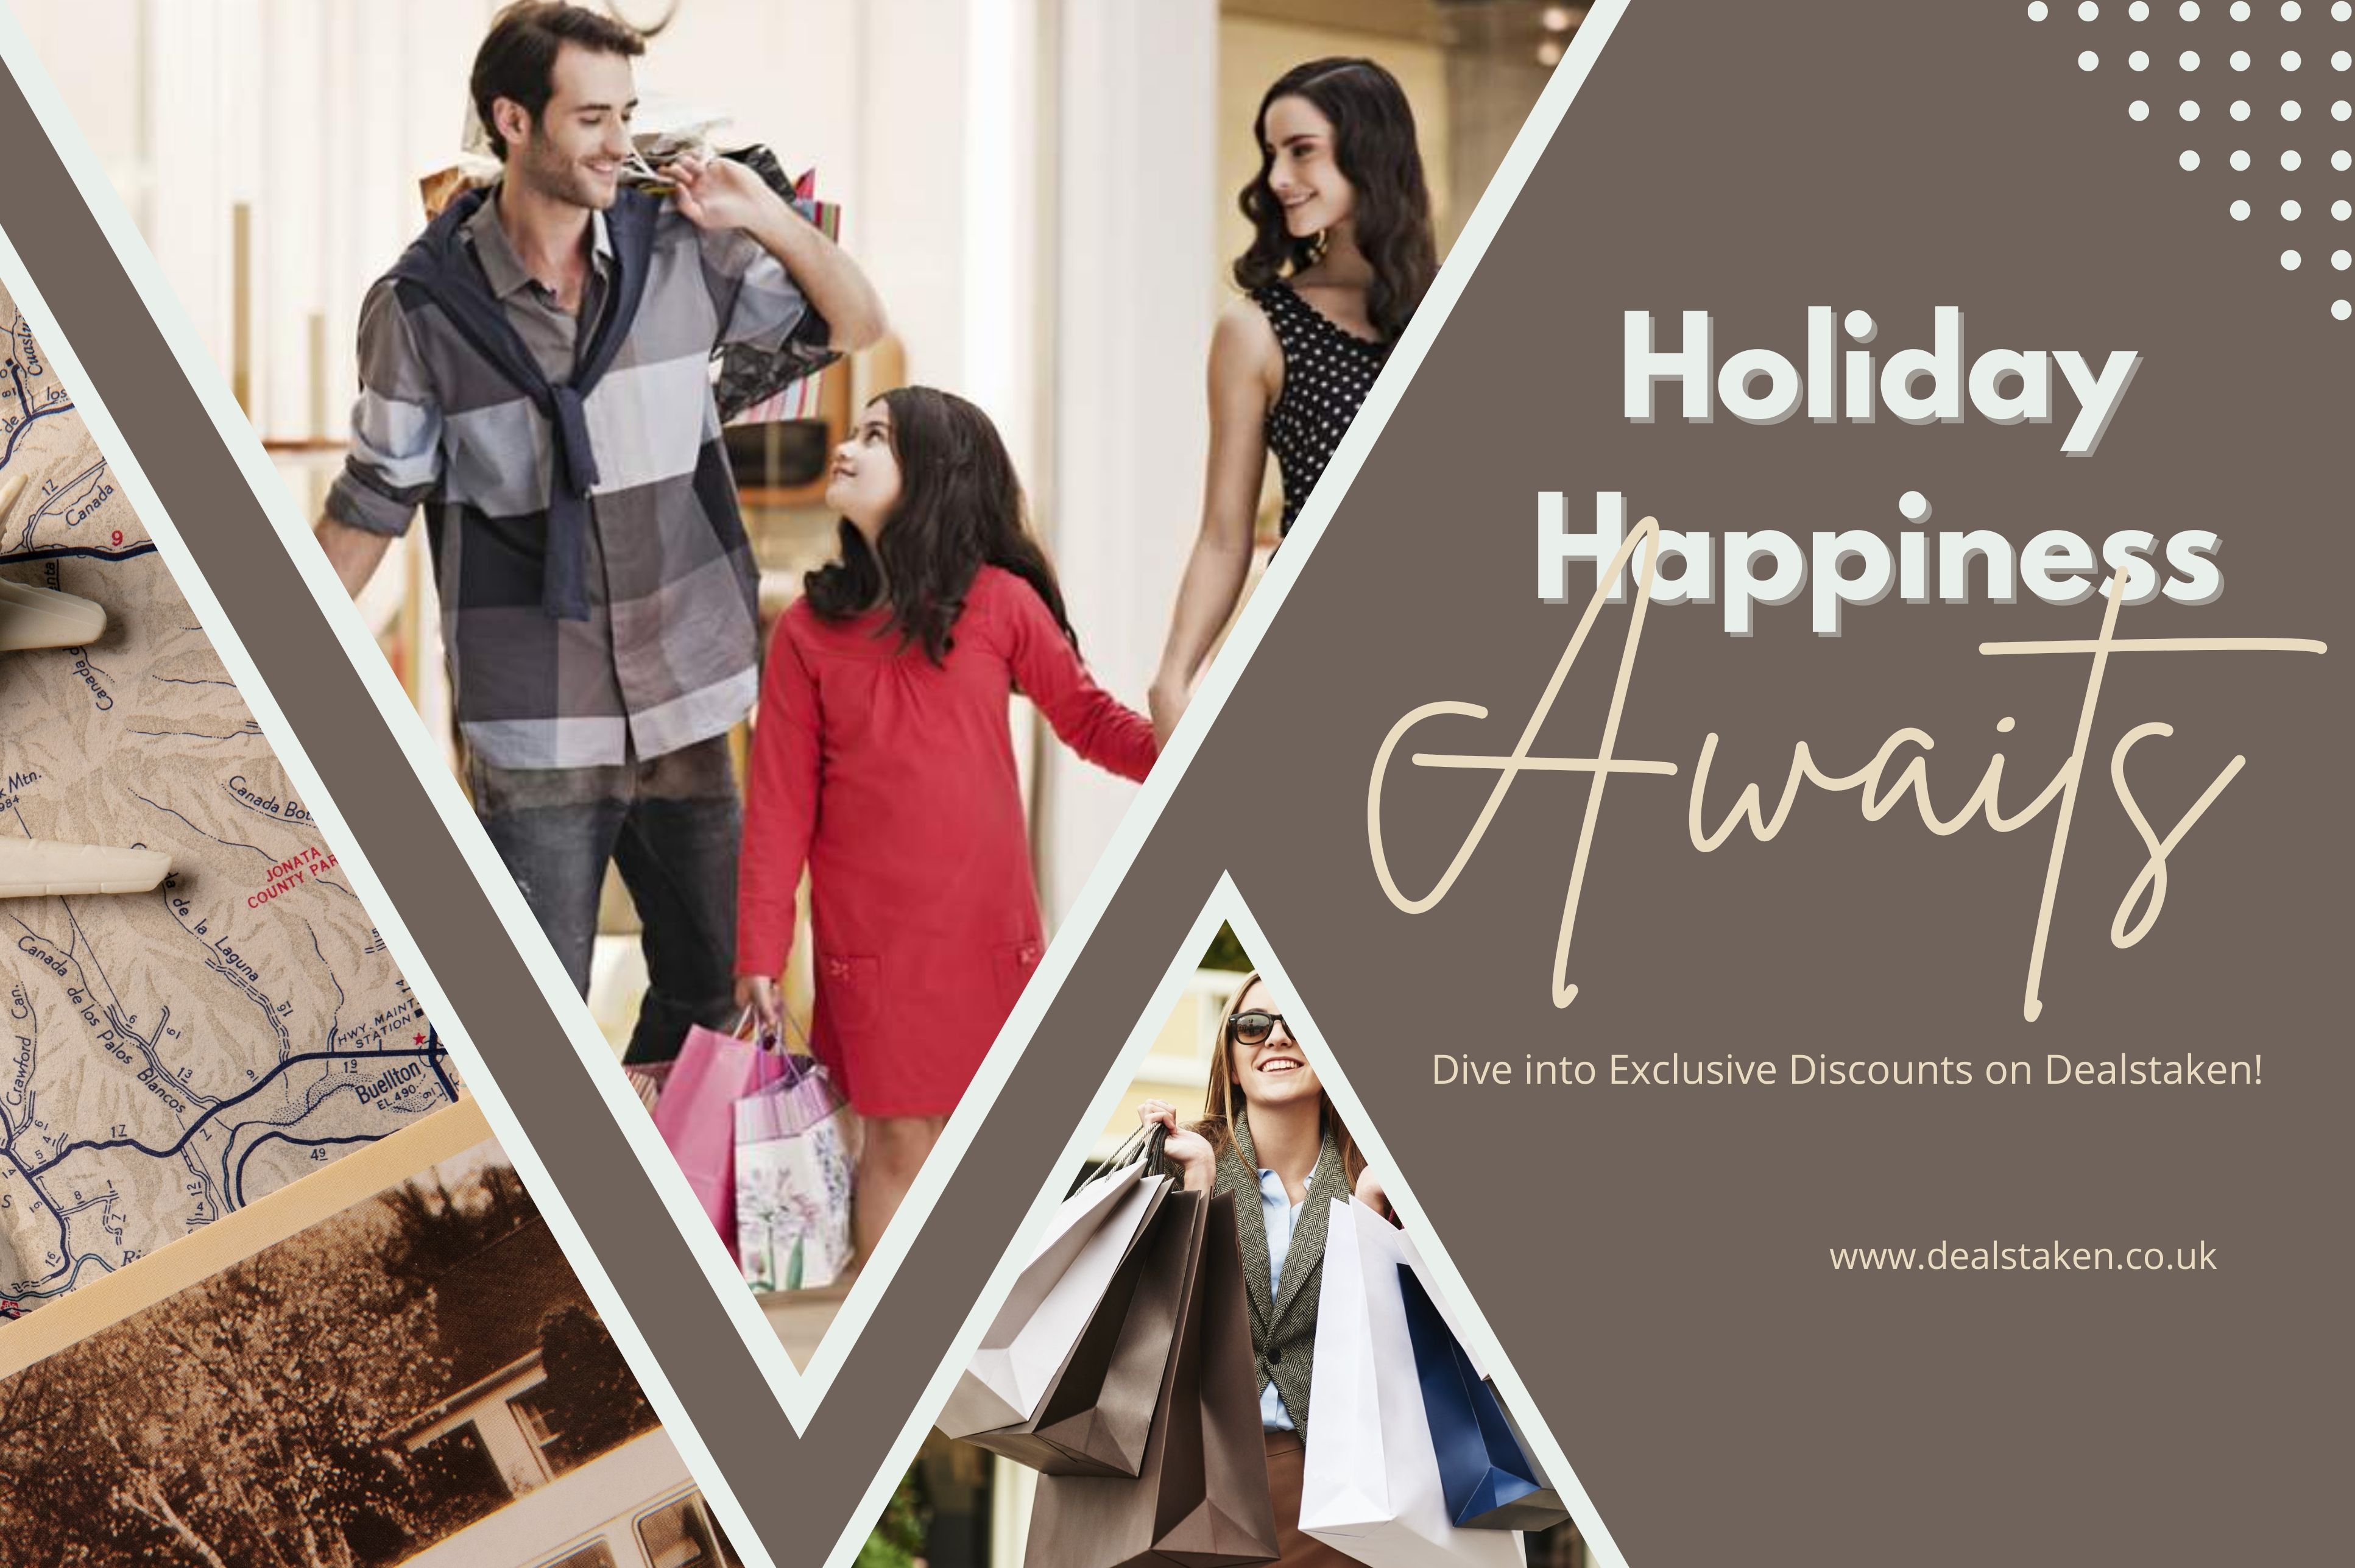 holiday-happiness-awaits-dive-into-exclusive-discounts-on-dealstaken